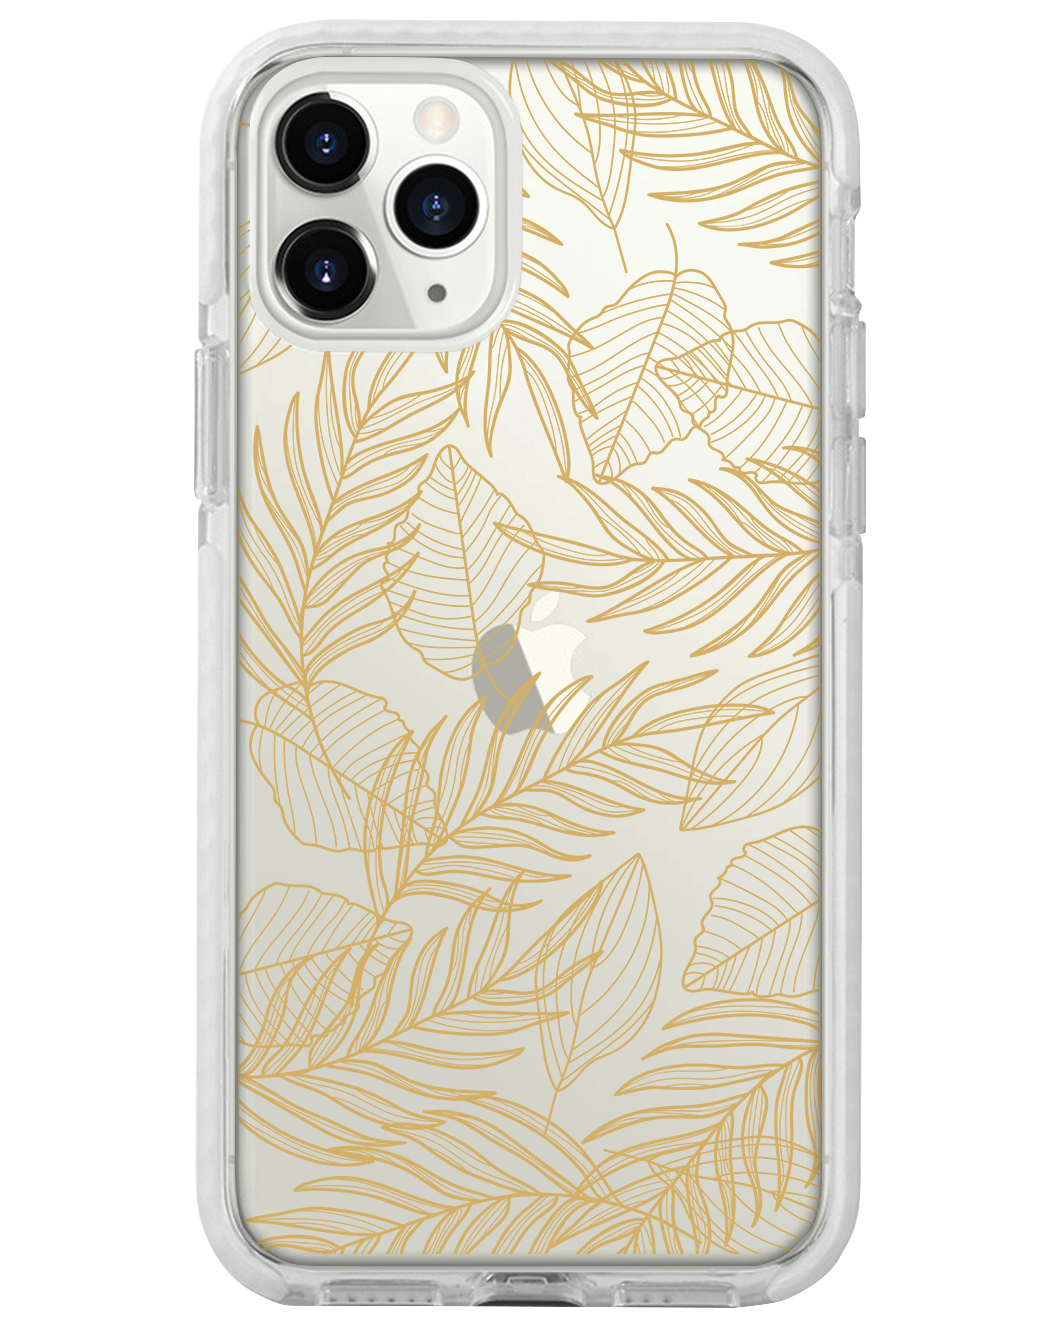 iPhone - Sketchy Tropical 1.0